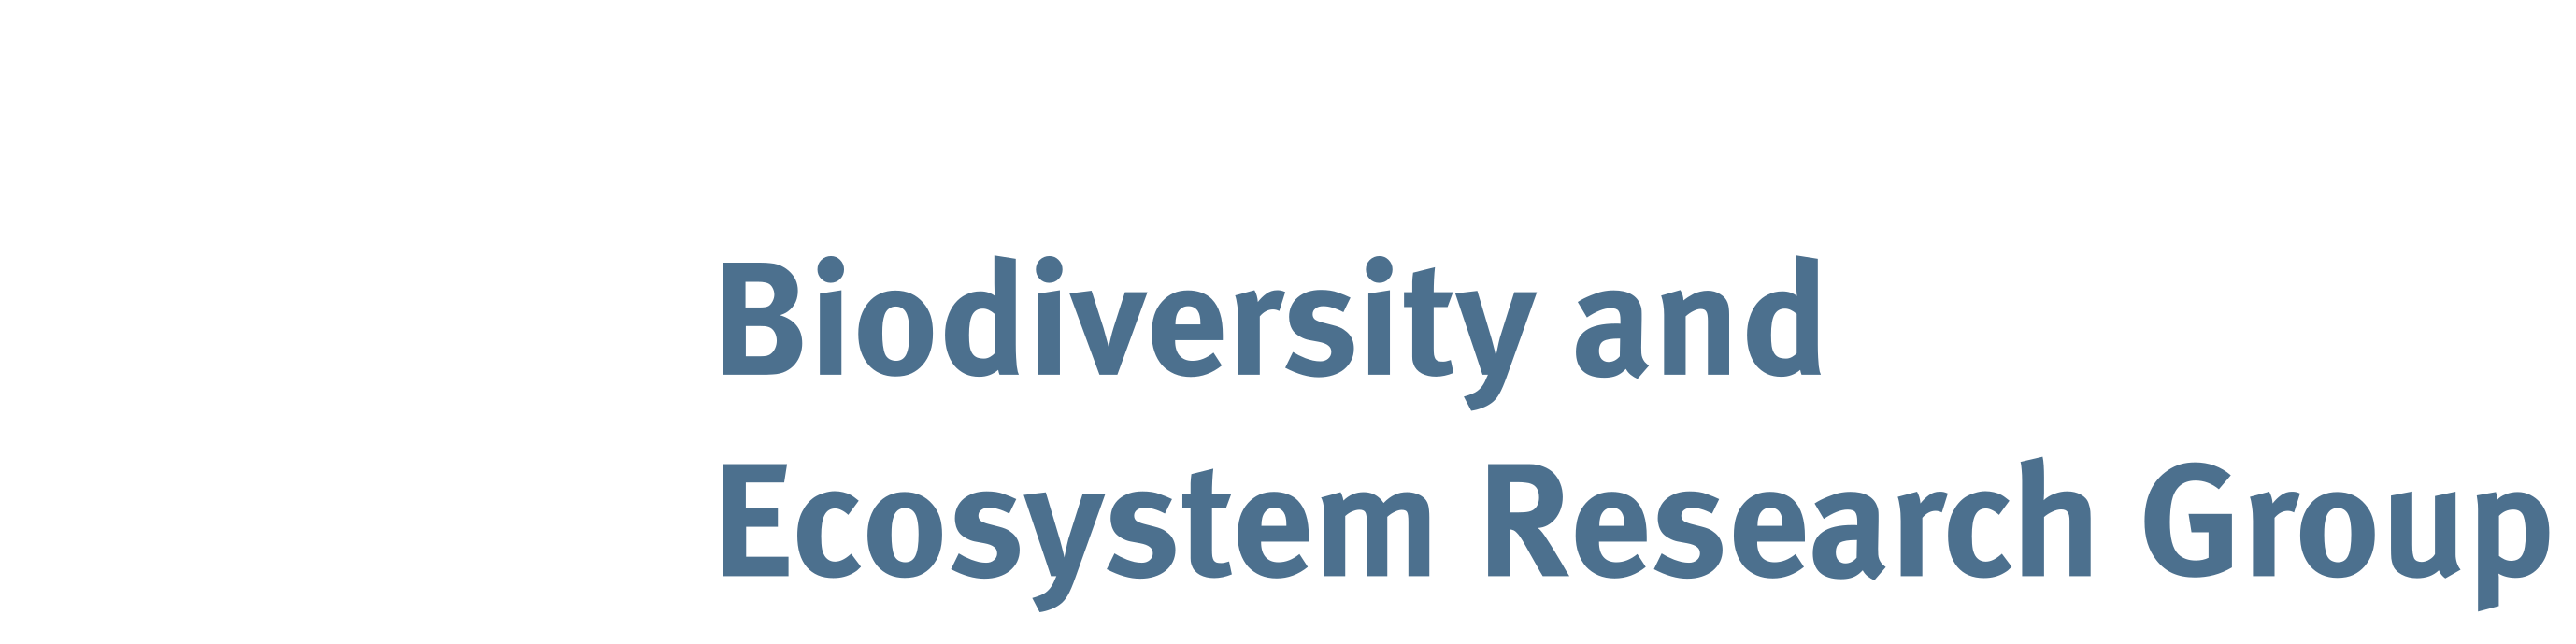 Biodiversity and Ecosystem Research Group